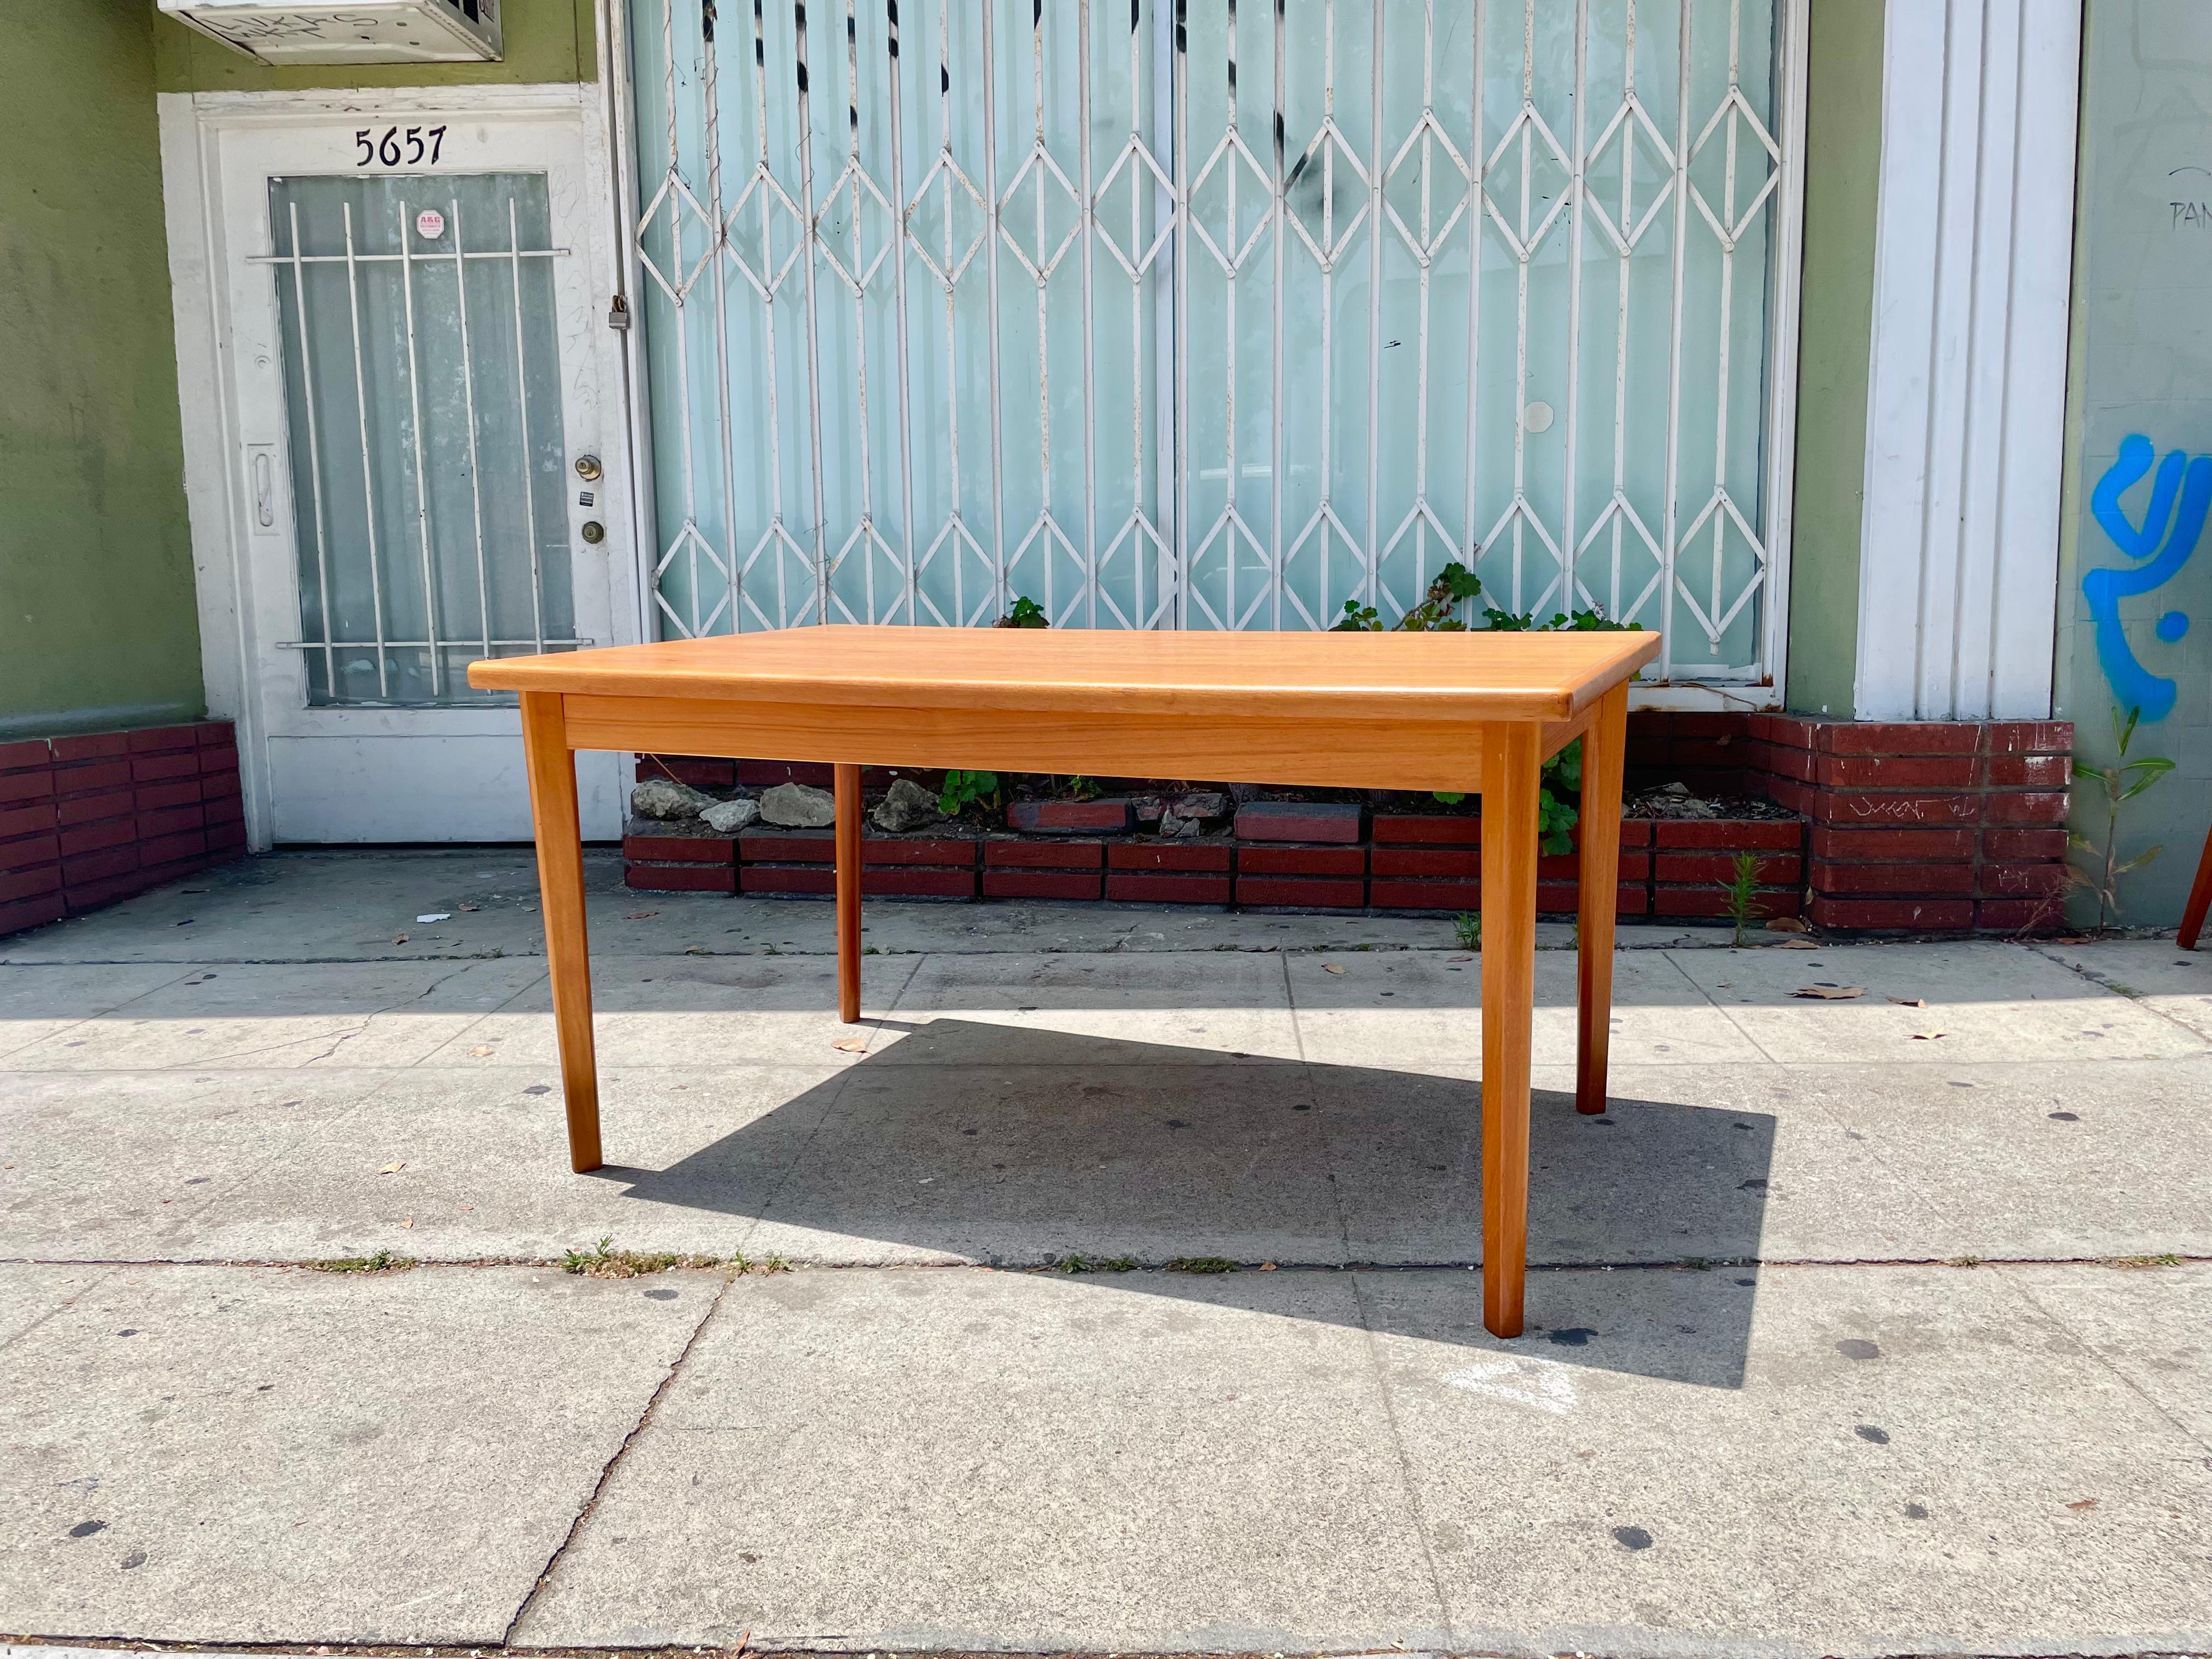 extendable vintage dining table